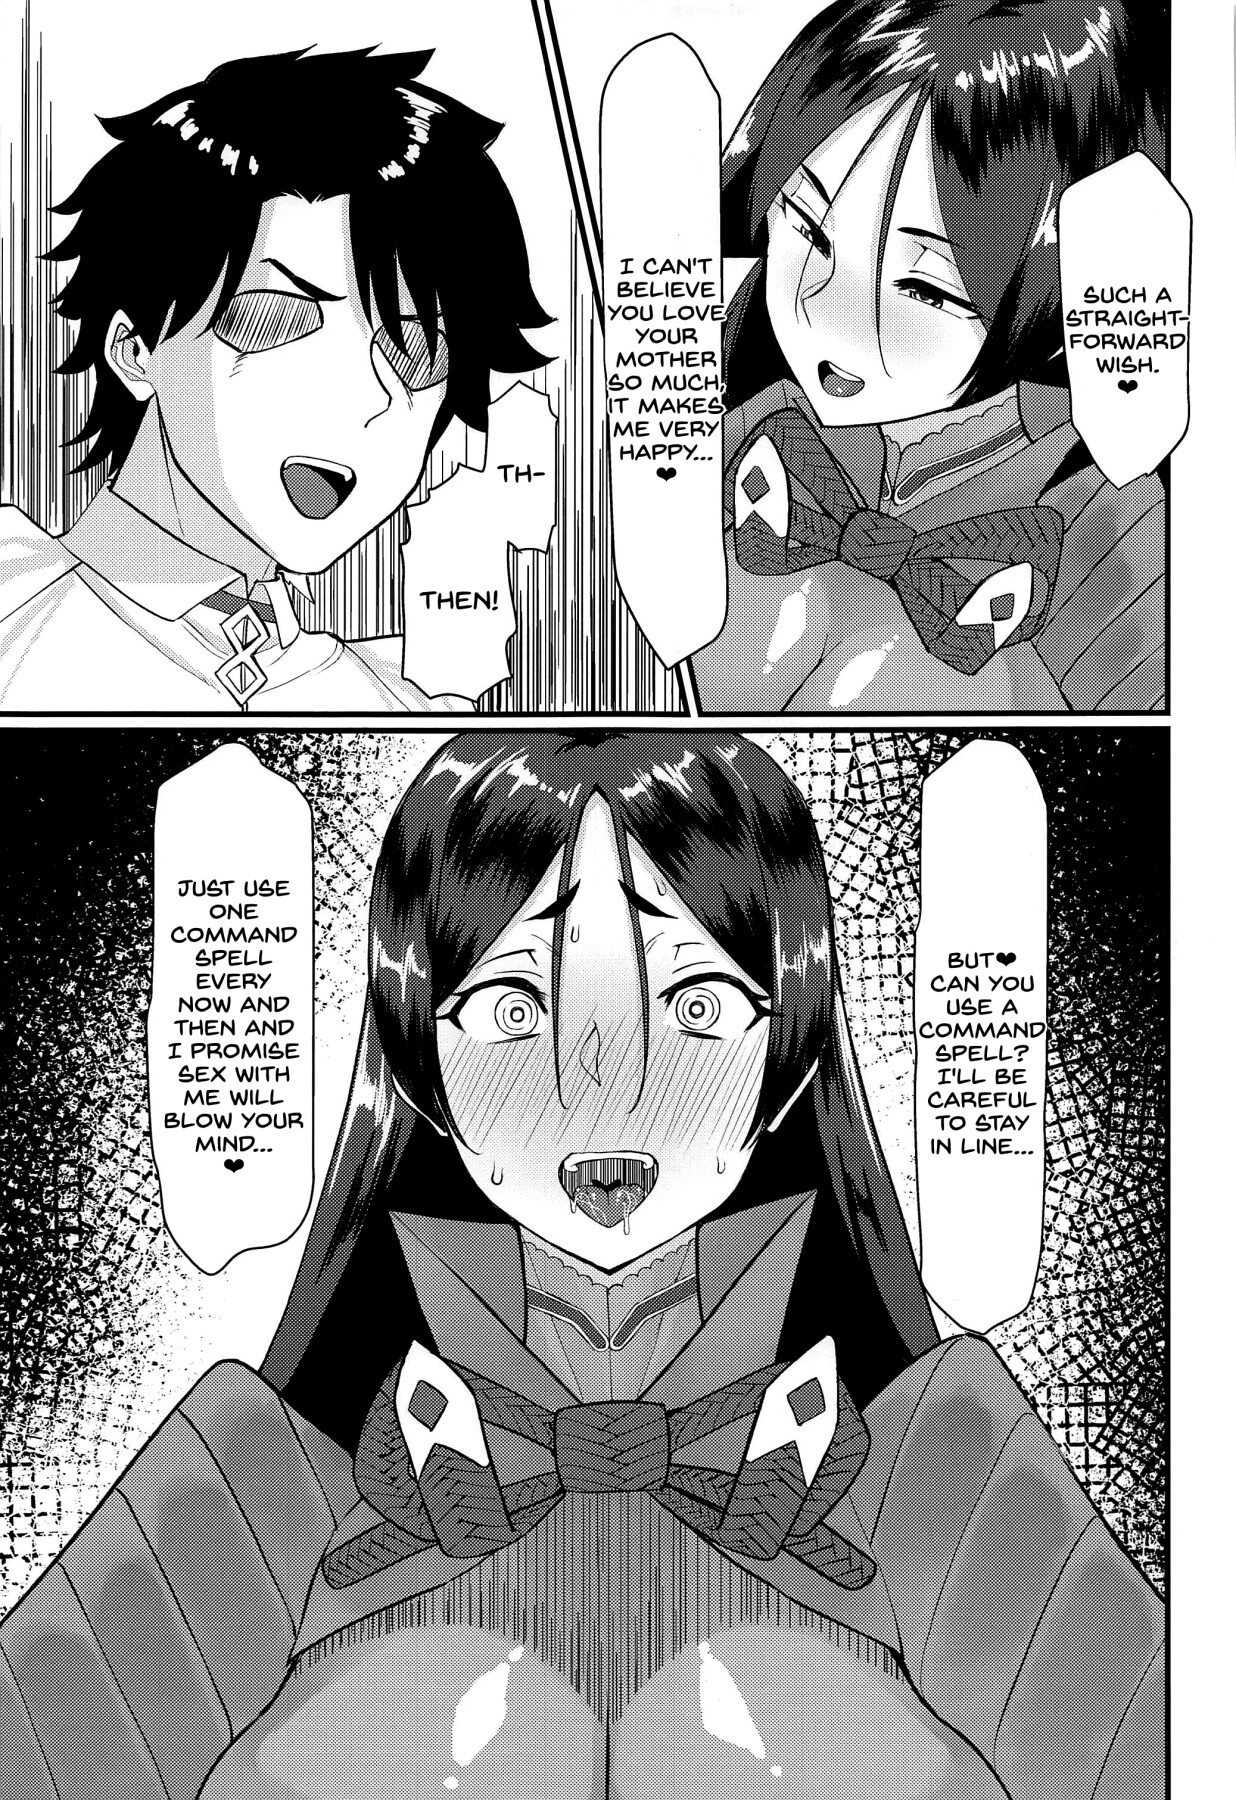 hentai manga The result of using command spells on Minamoto no Yorimitsu in a planned manner